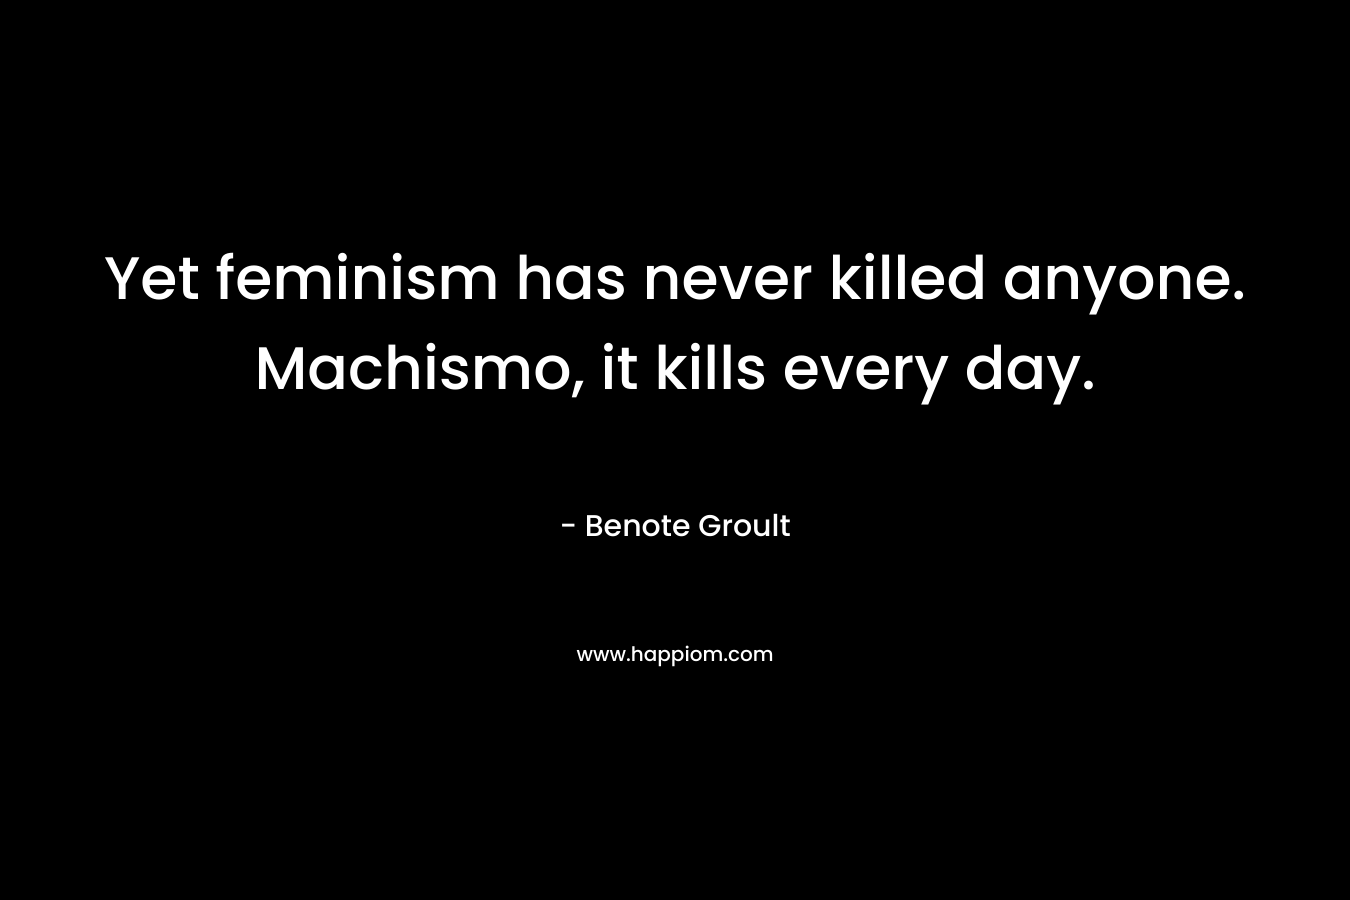 Yet feminism has never killed anyone. Machismo, it kills every day. – Benote Groult